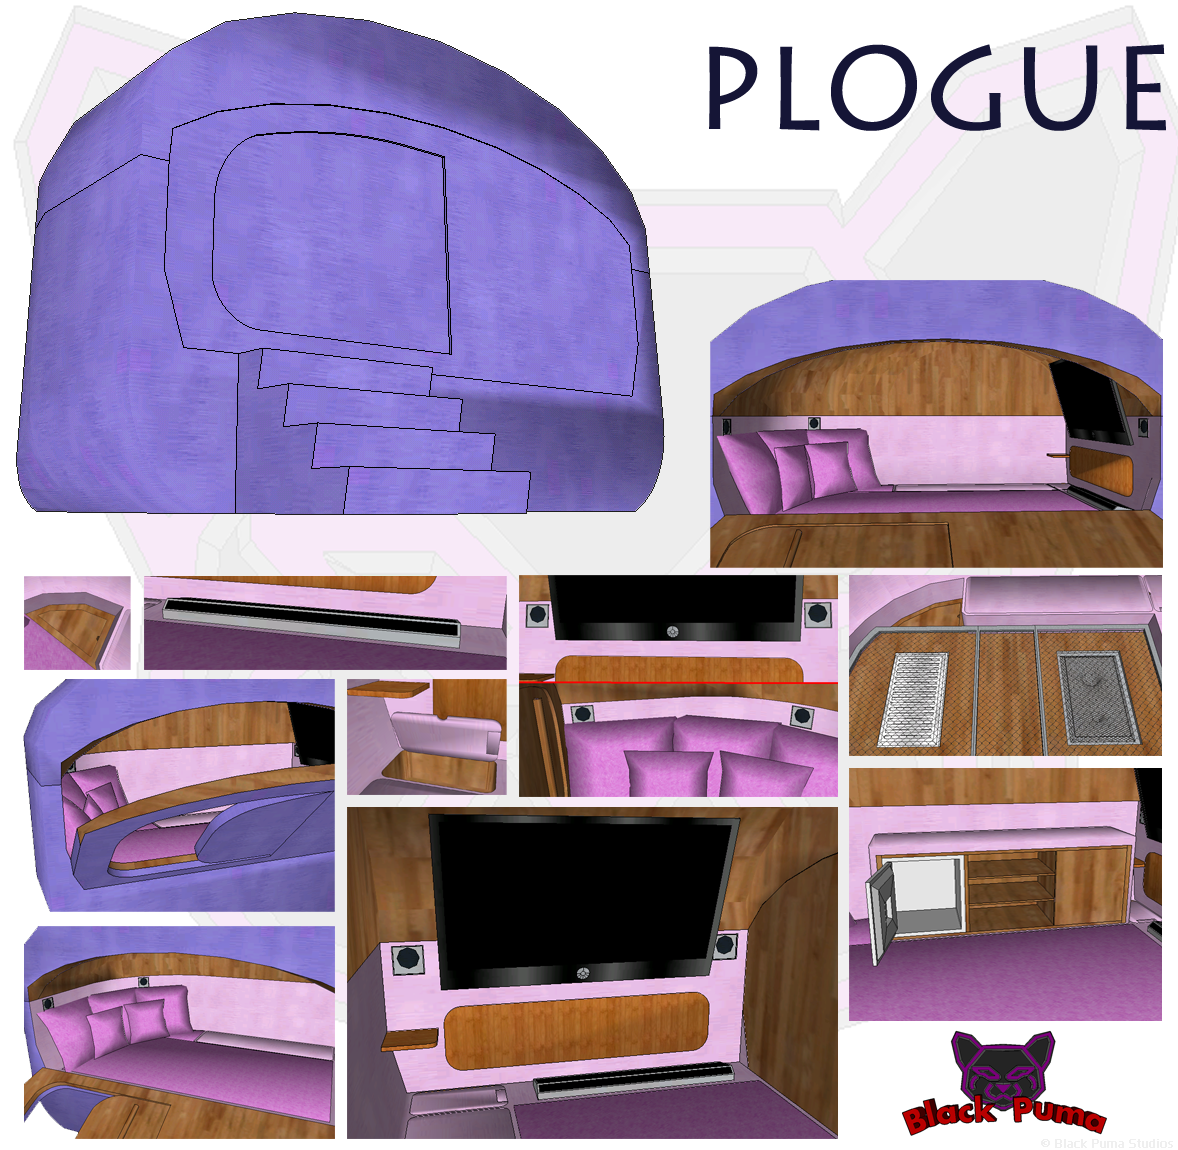 The Plogue